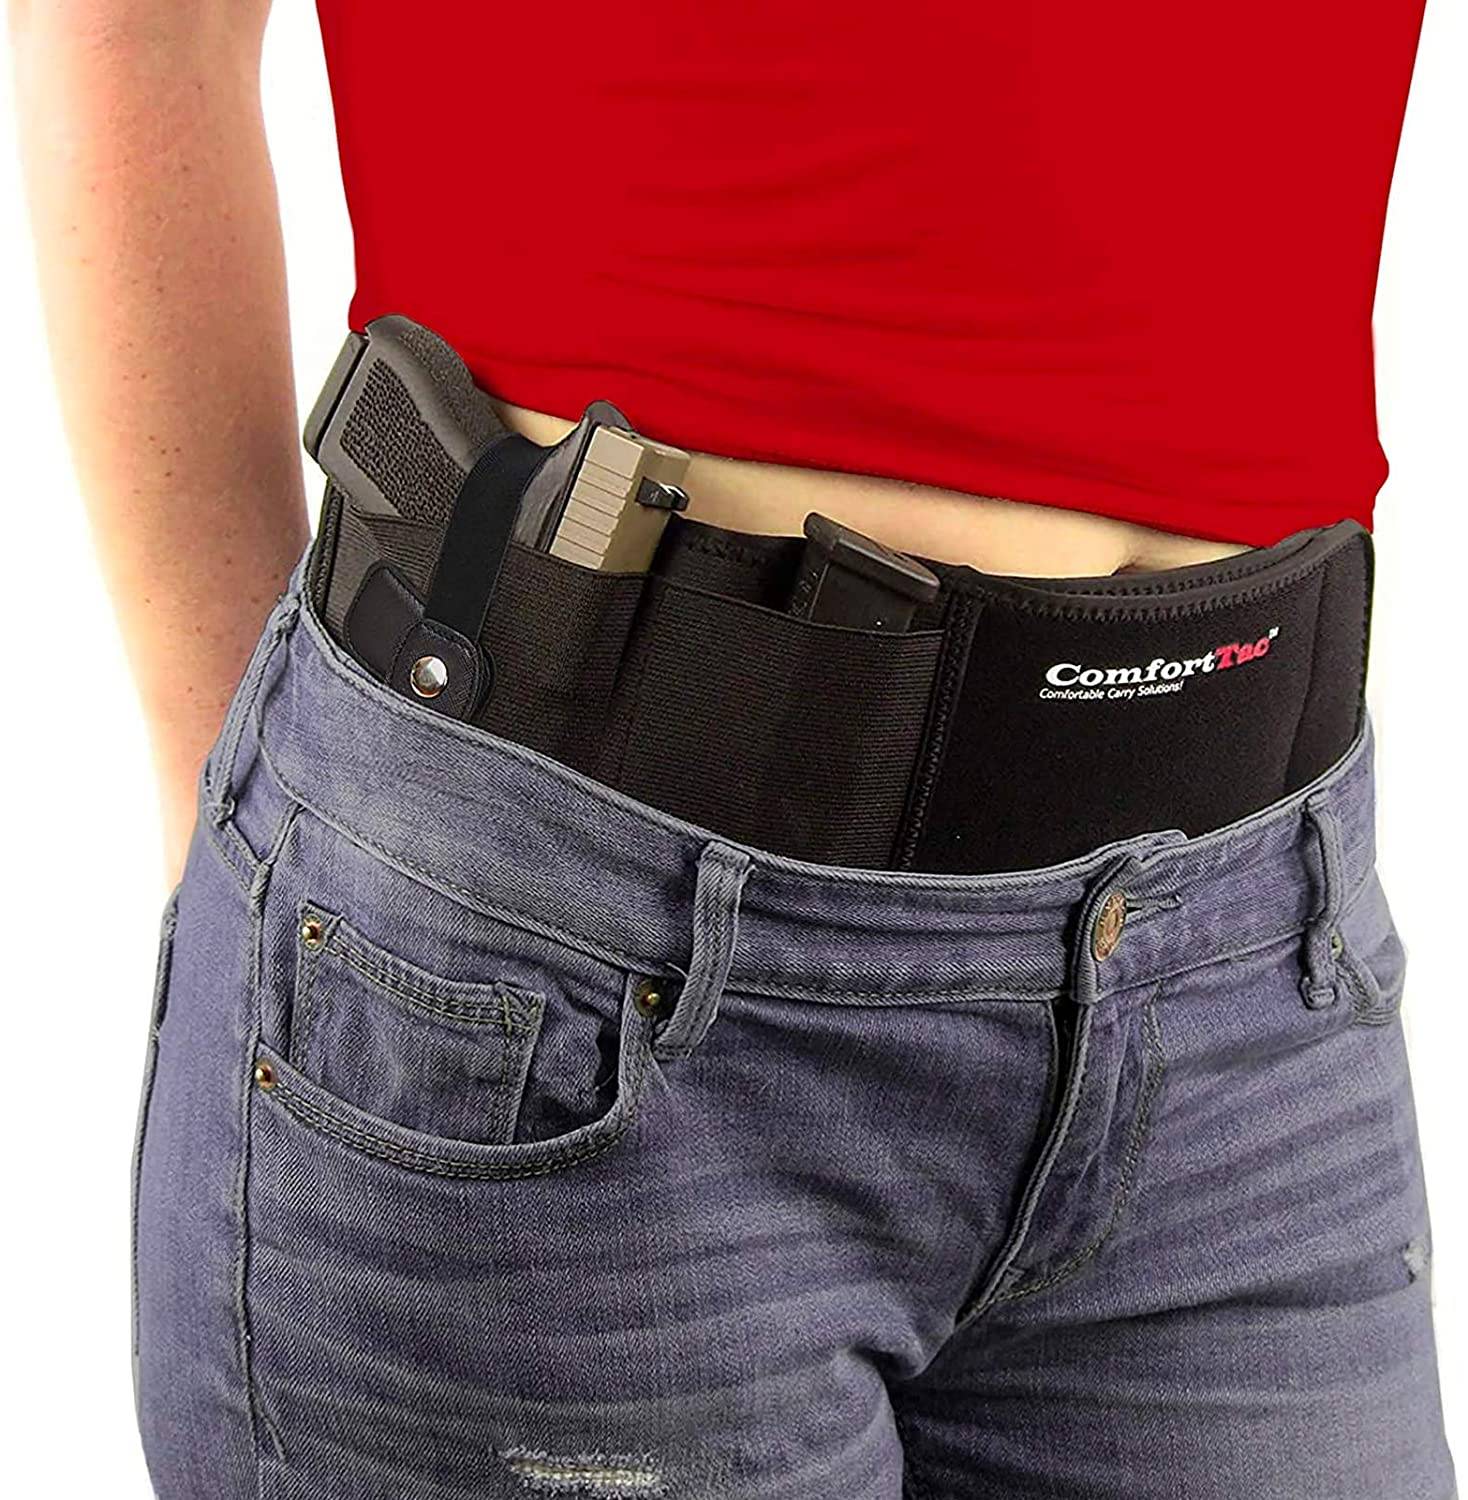 Breathable Neoprene Waist Holster fo... Belly Band Holster for Concealed Carry 